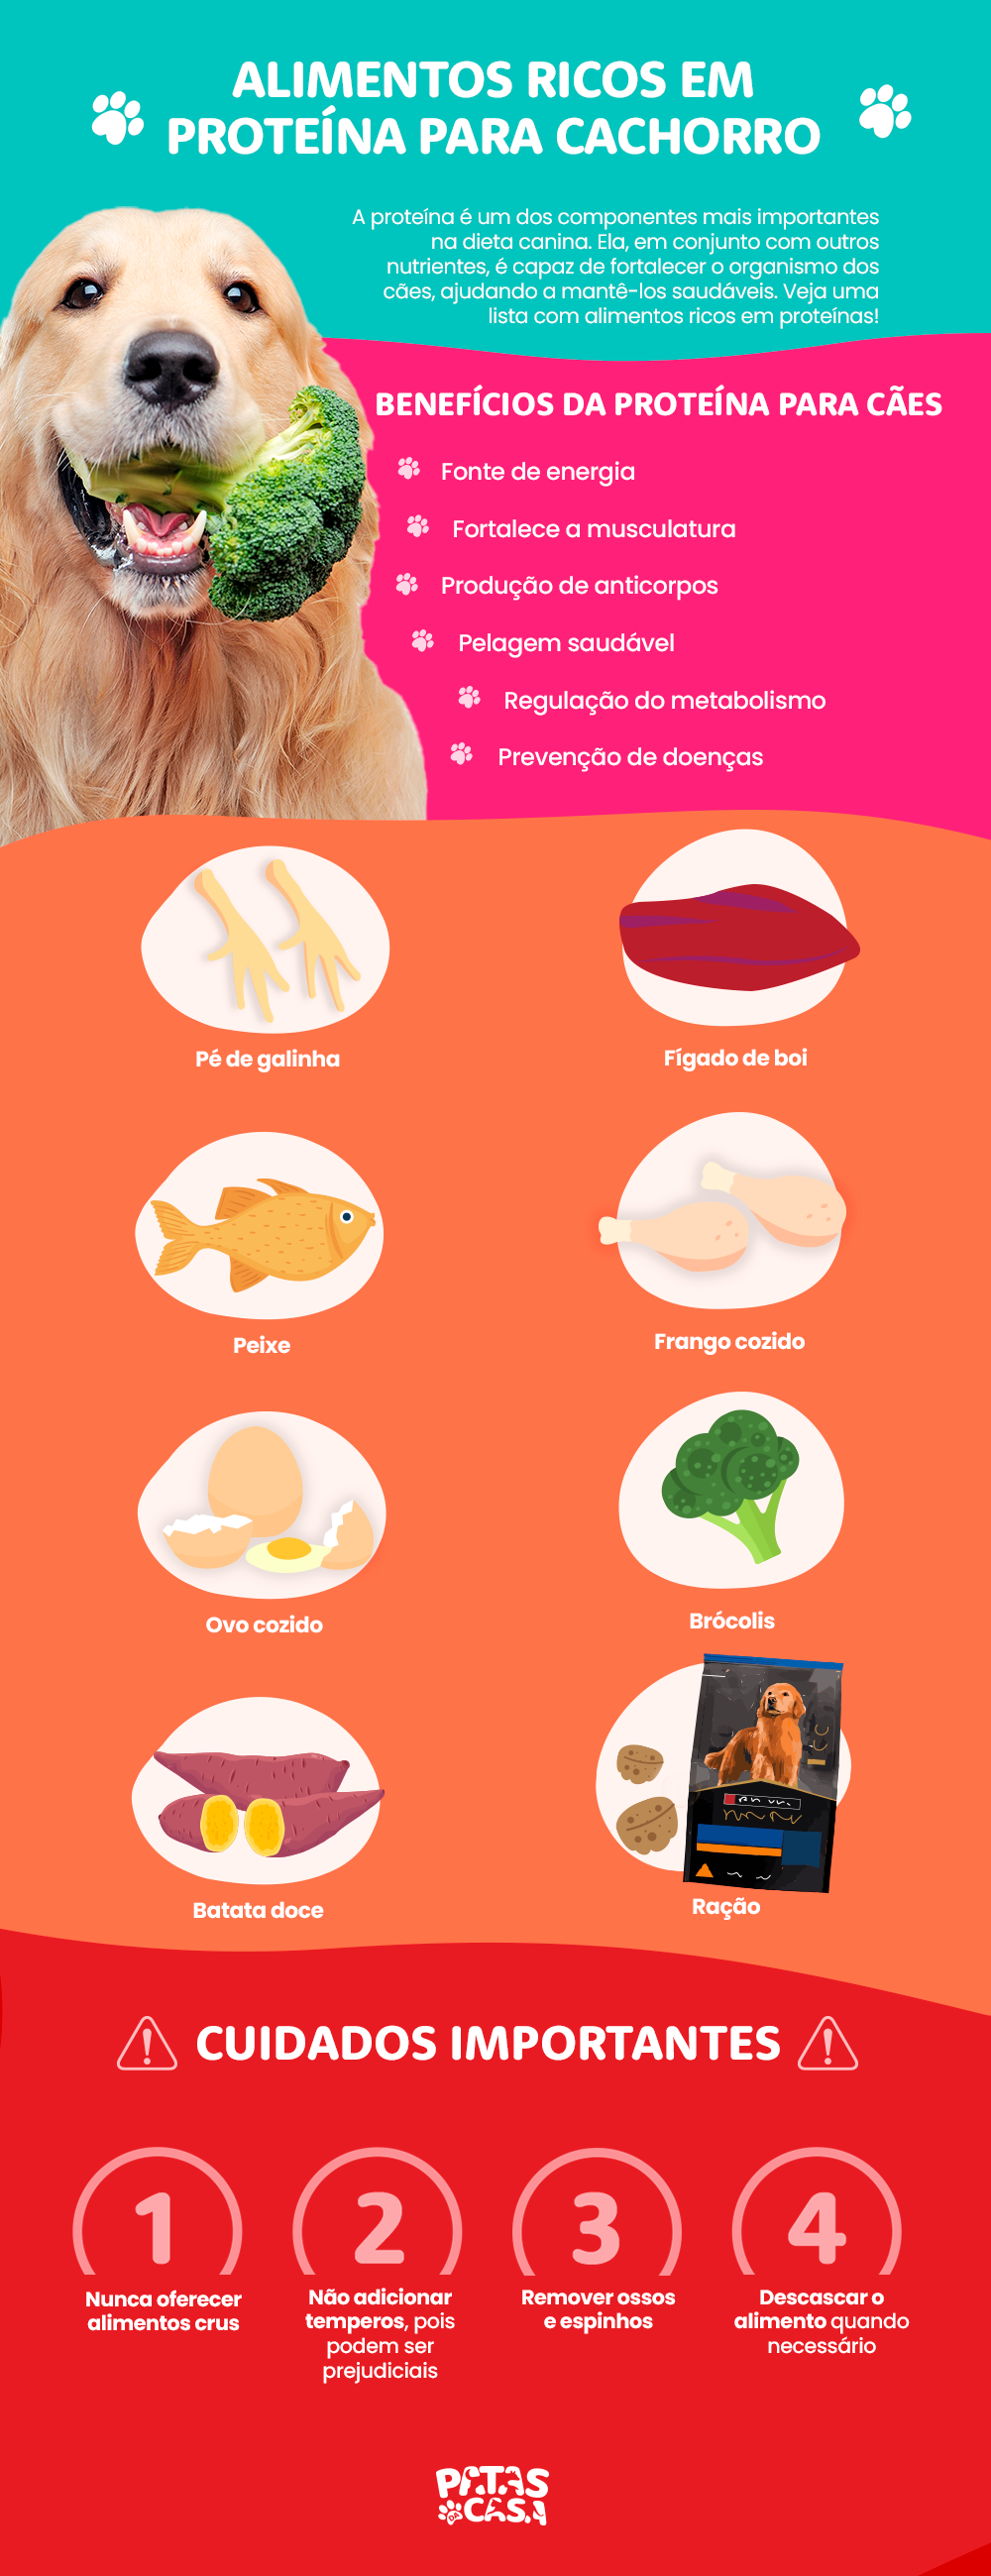  See the list of protein-rich dog foods (with infographic)